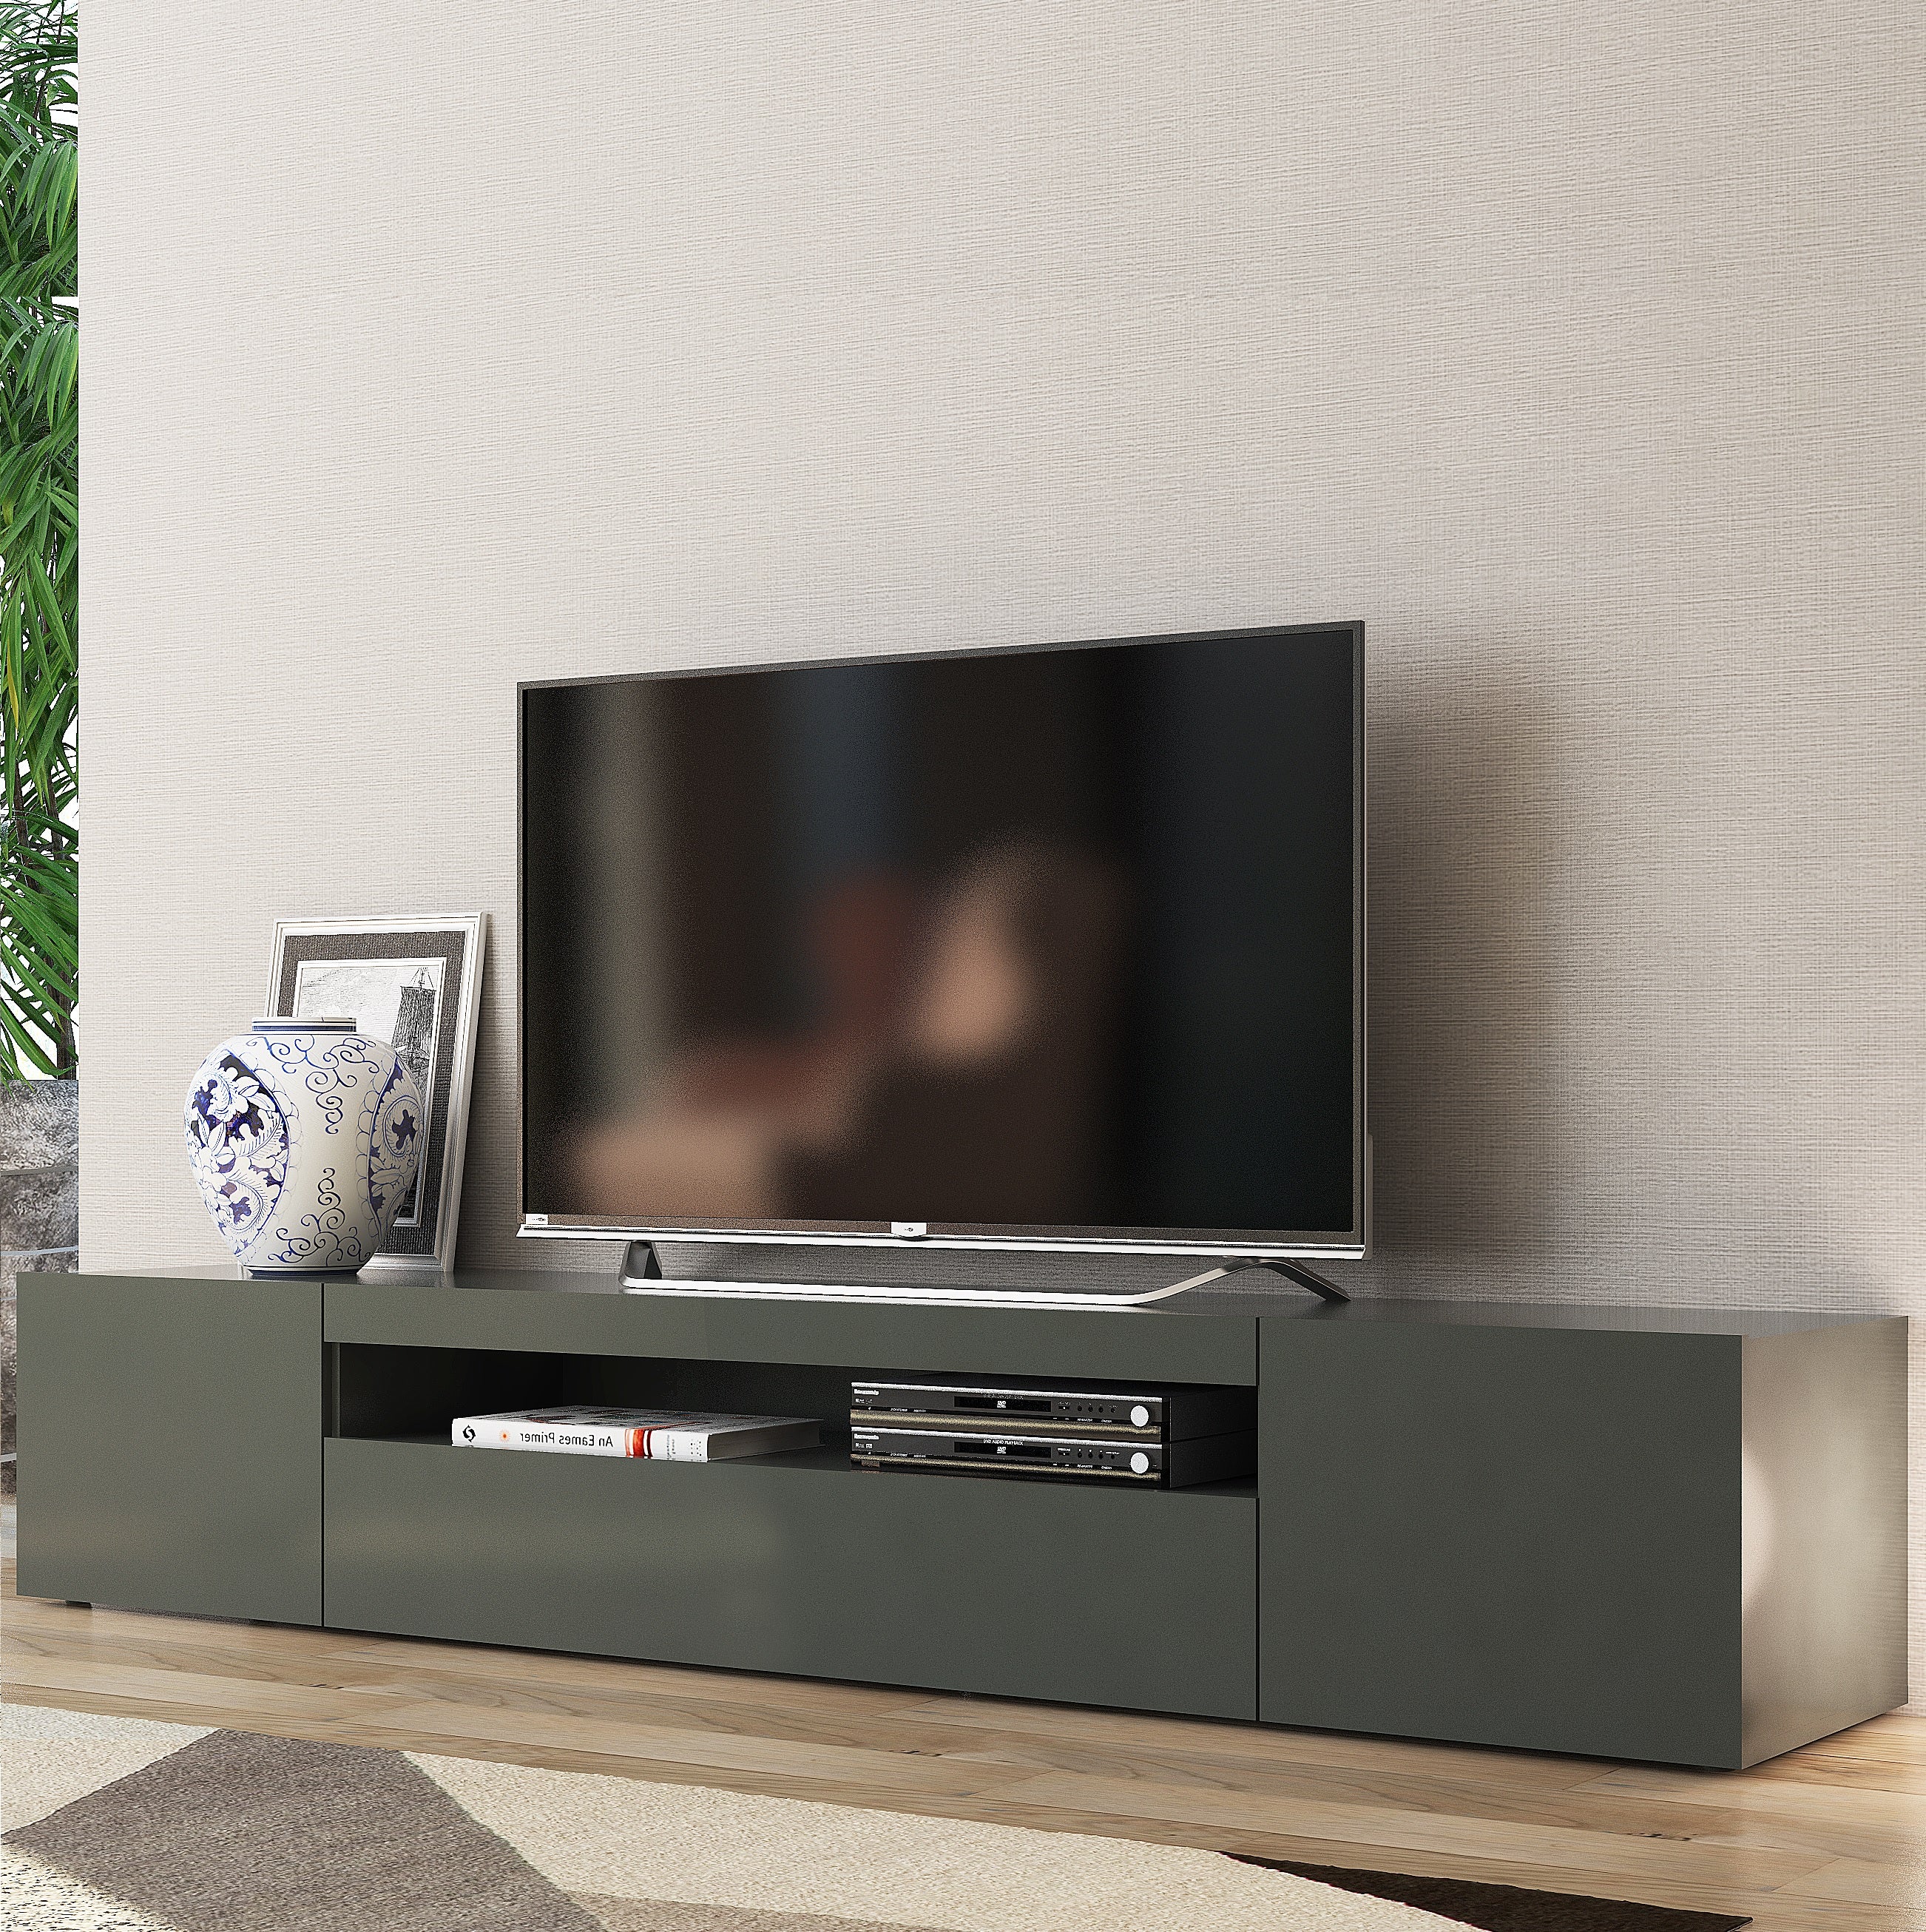 DAIQUIRI TV Stand 78.7inch, Multiple Finishes - Furniture.Agency